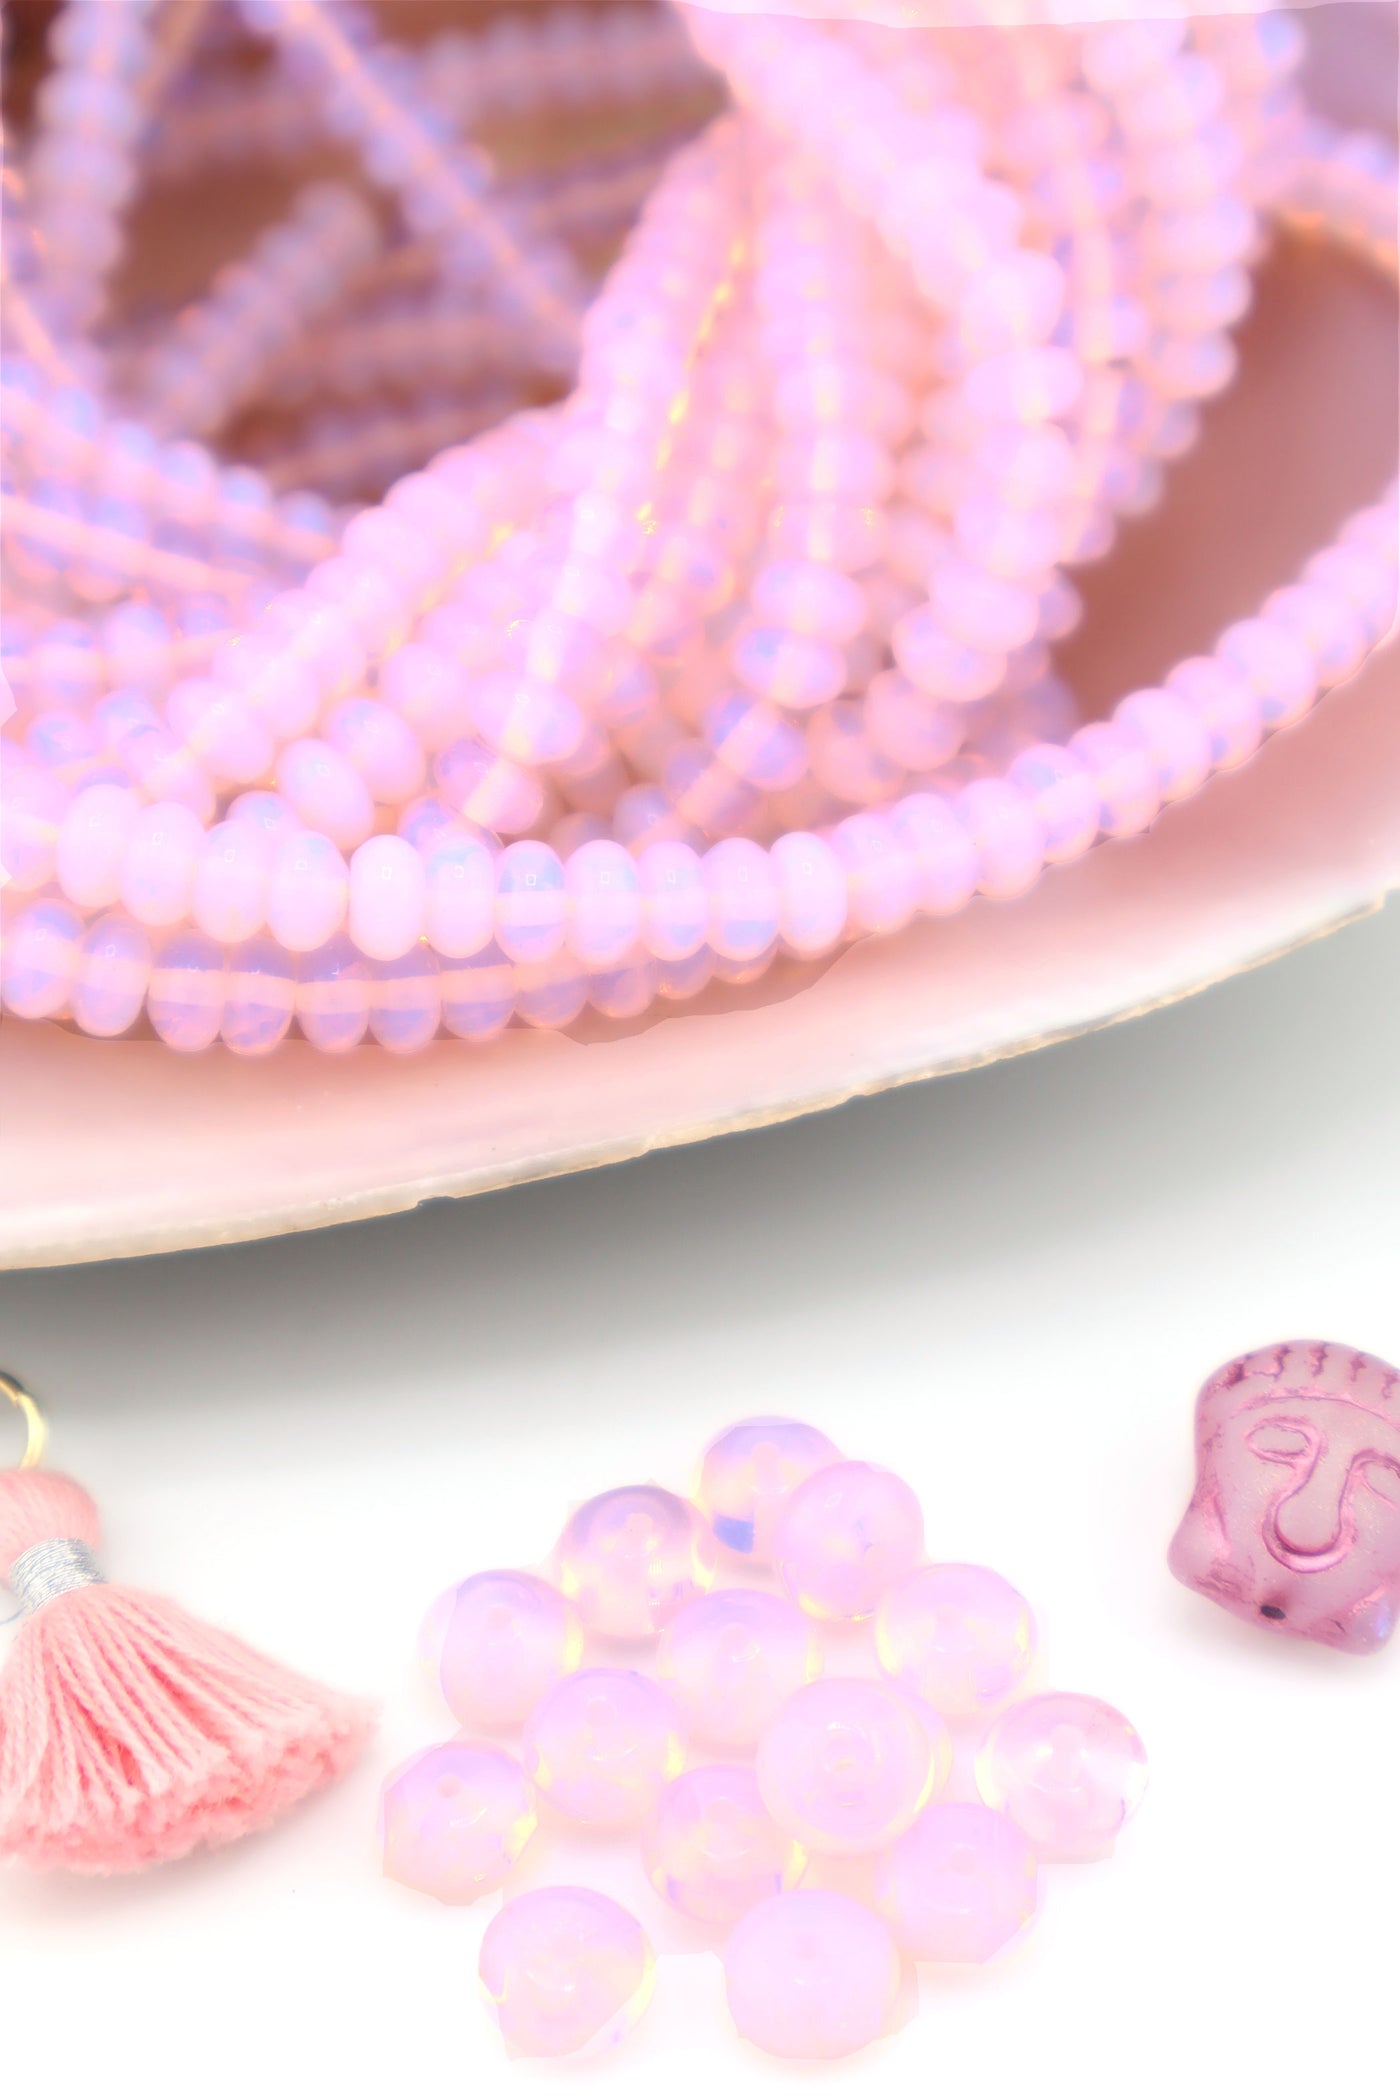 The galaxy-like pastel pink in these jellyfish opalite beads is great for beginner DIY jewelry.